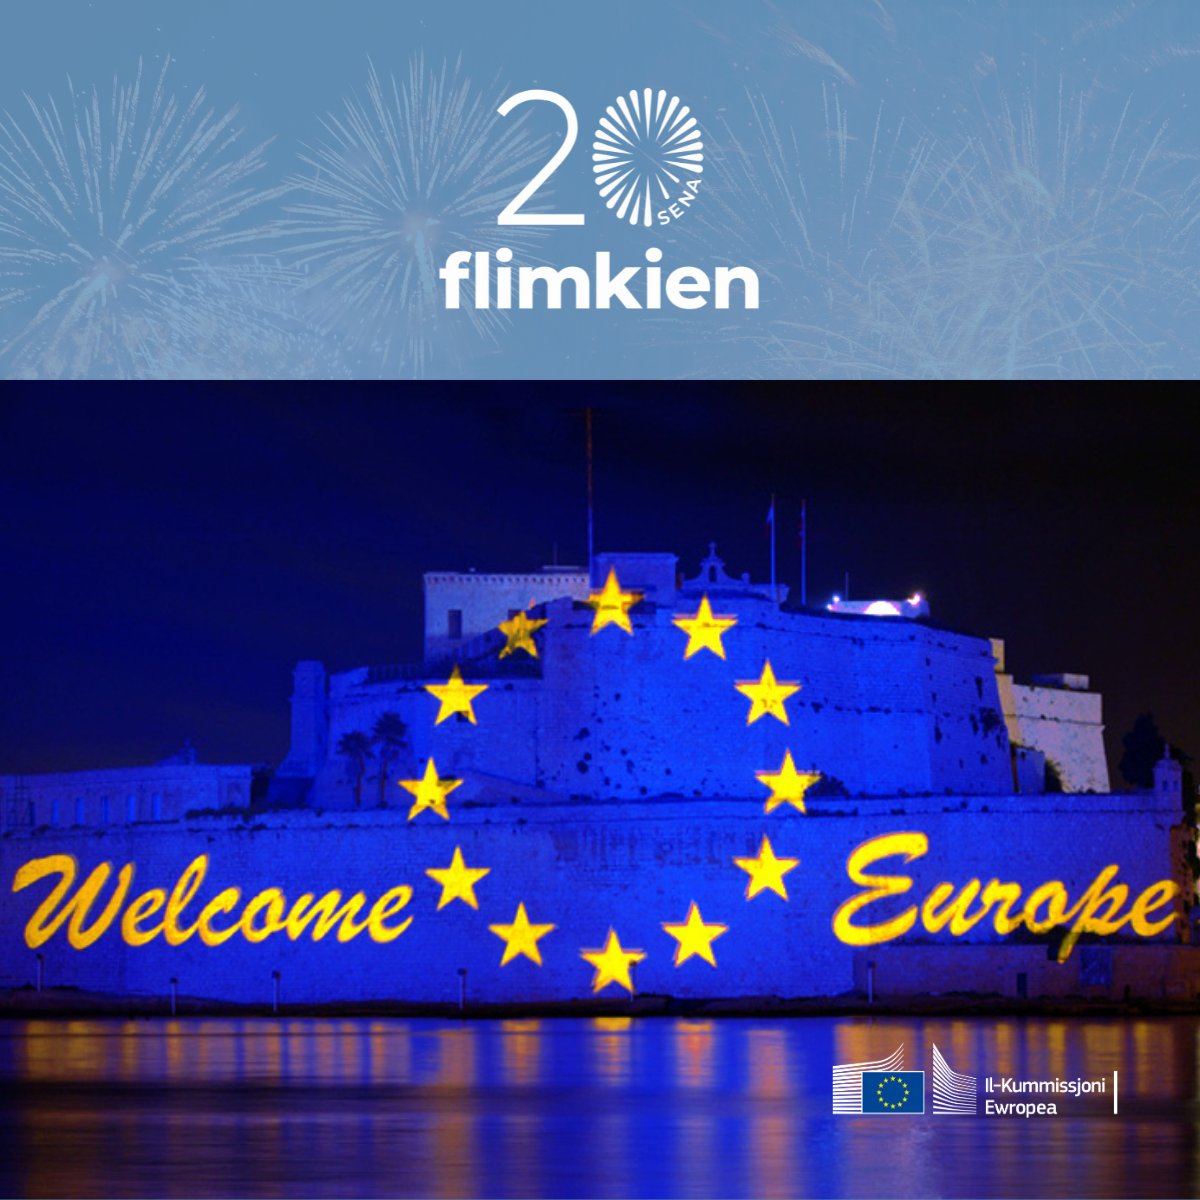 Tomorrow we celebrate 20 years since the EU's largest expansion! Do you remember where you watched this monumental moment? Did you join the celebrations in Valletta or did you watch it back home on your TV? Let us know in the comments below!